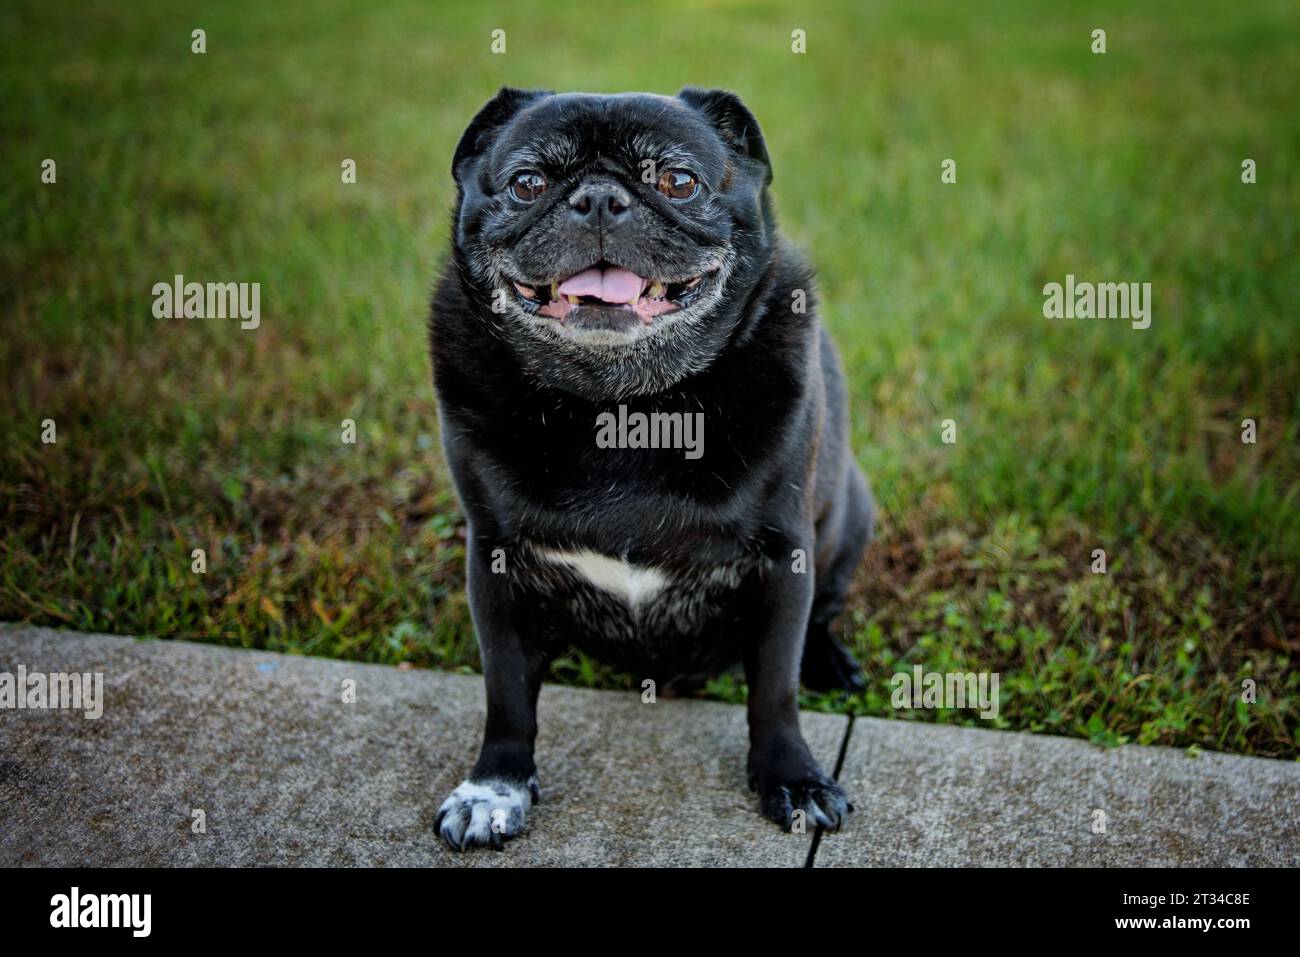 Black pug sitting in green grass smiling and panting Stock Photo